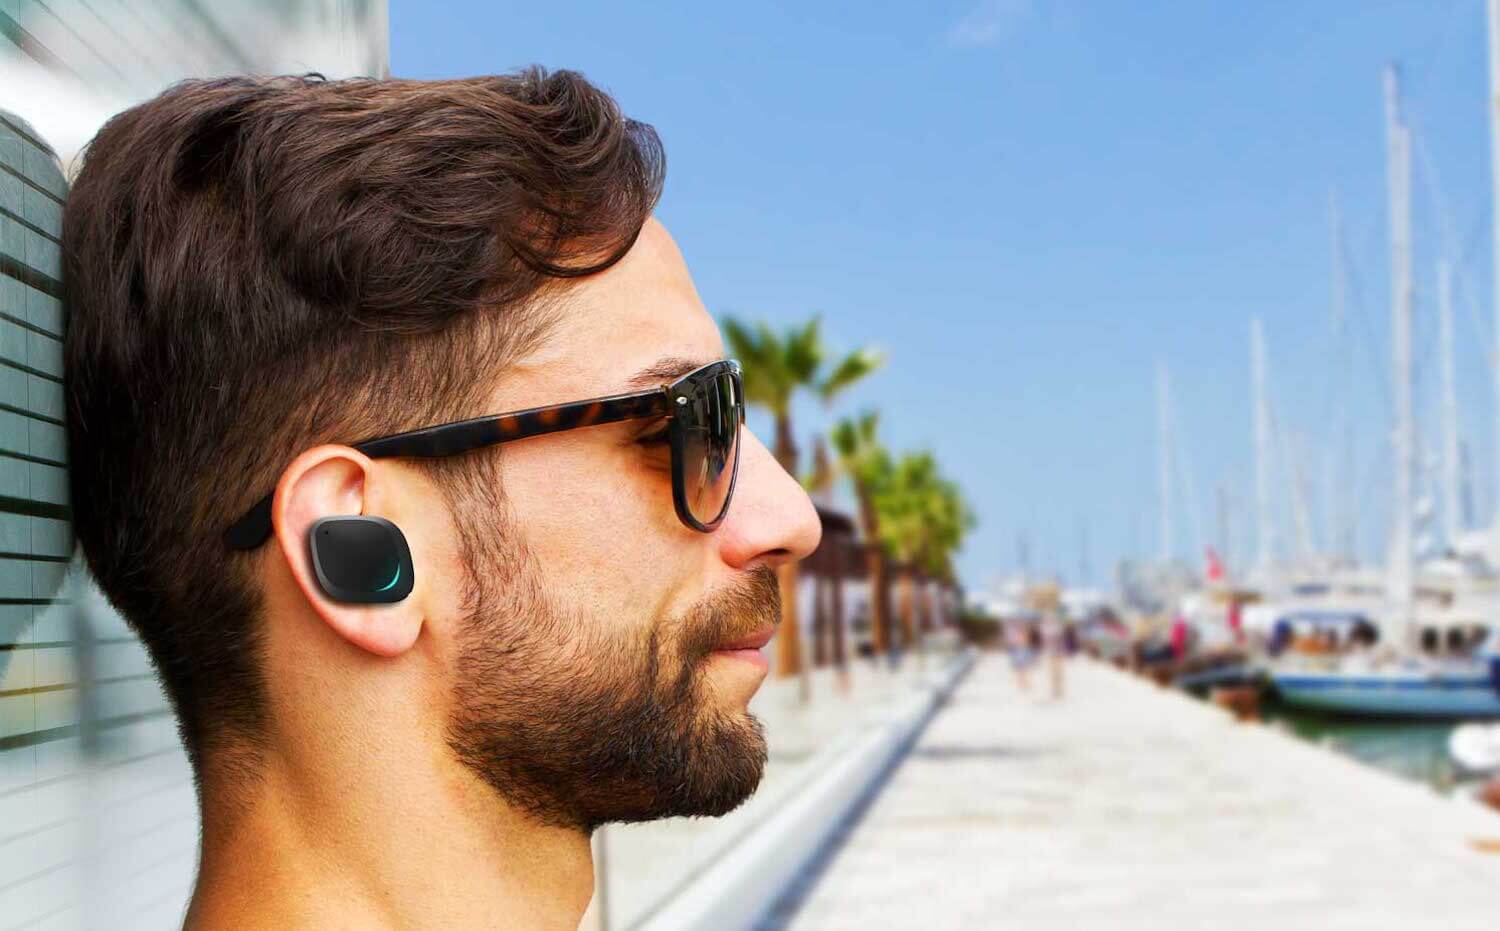 Ranking the best Bluetooth headsets of 2022